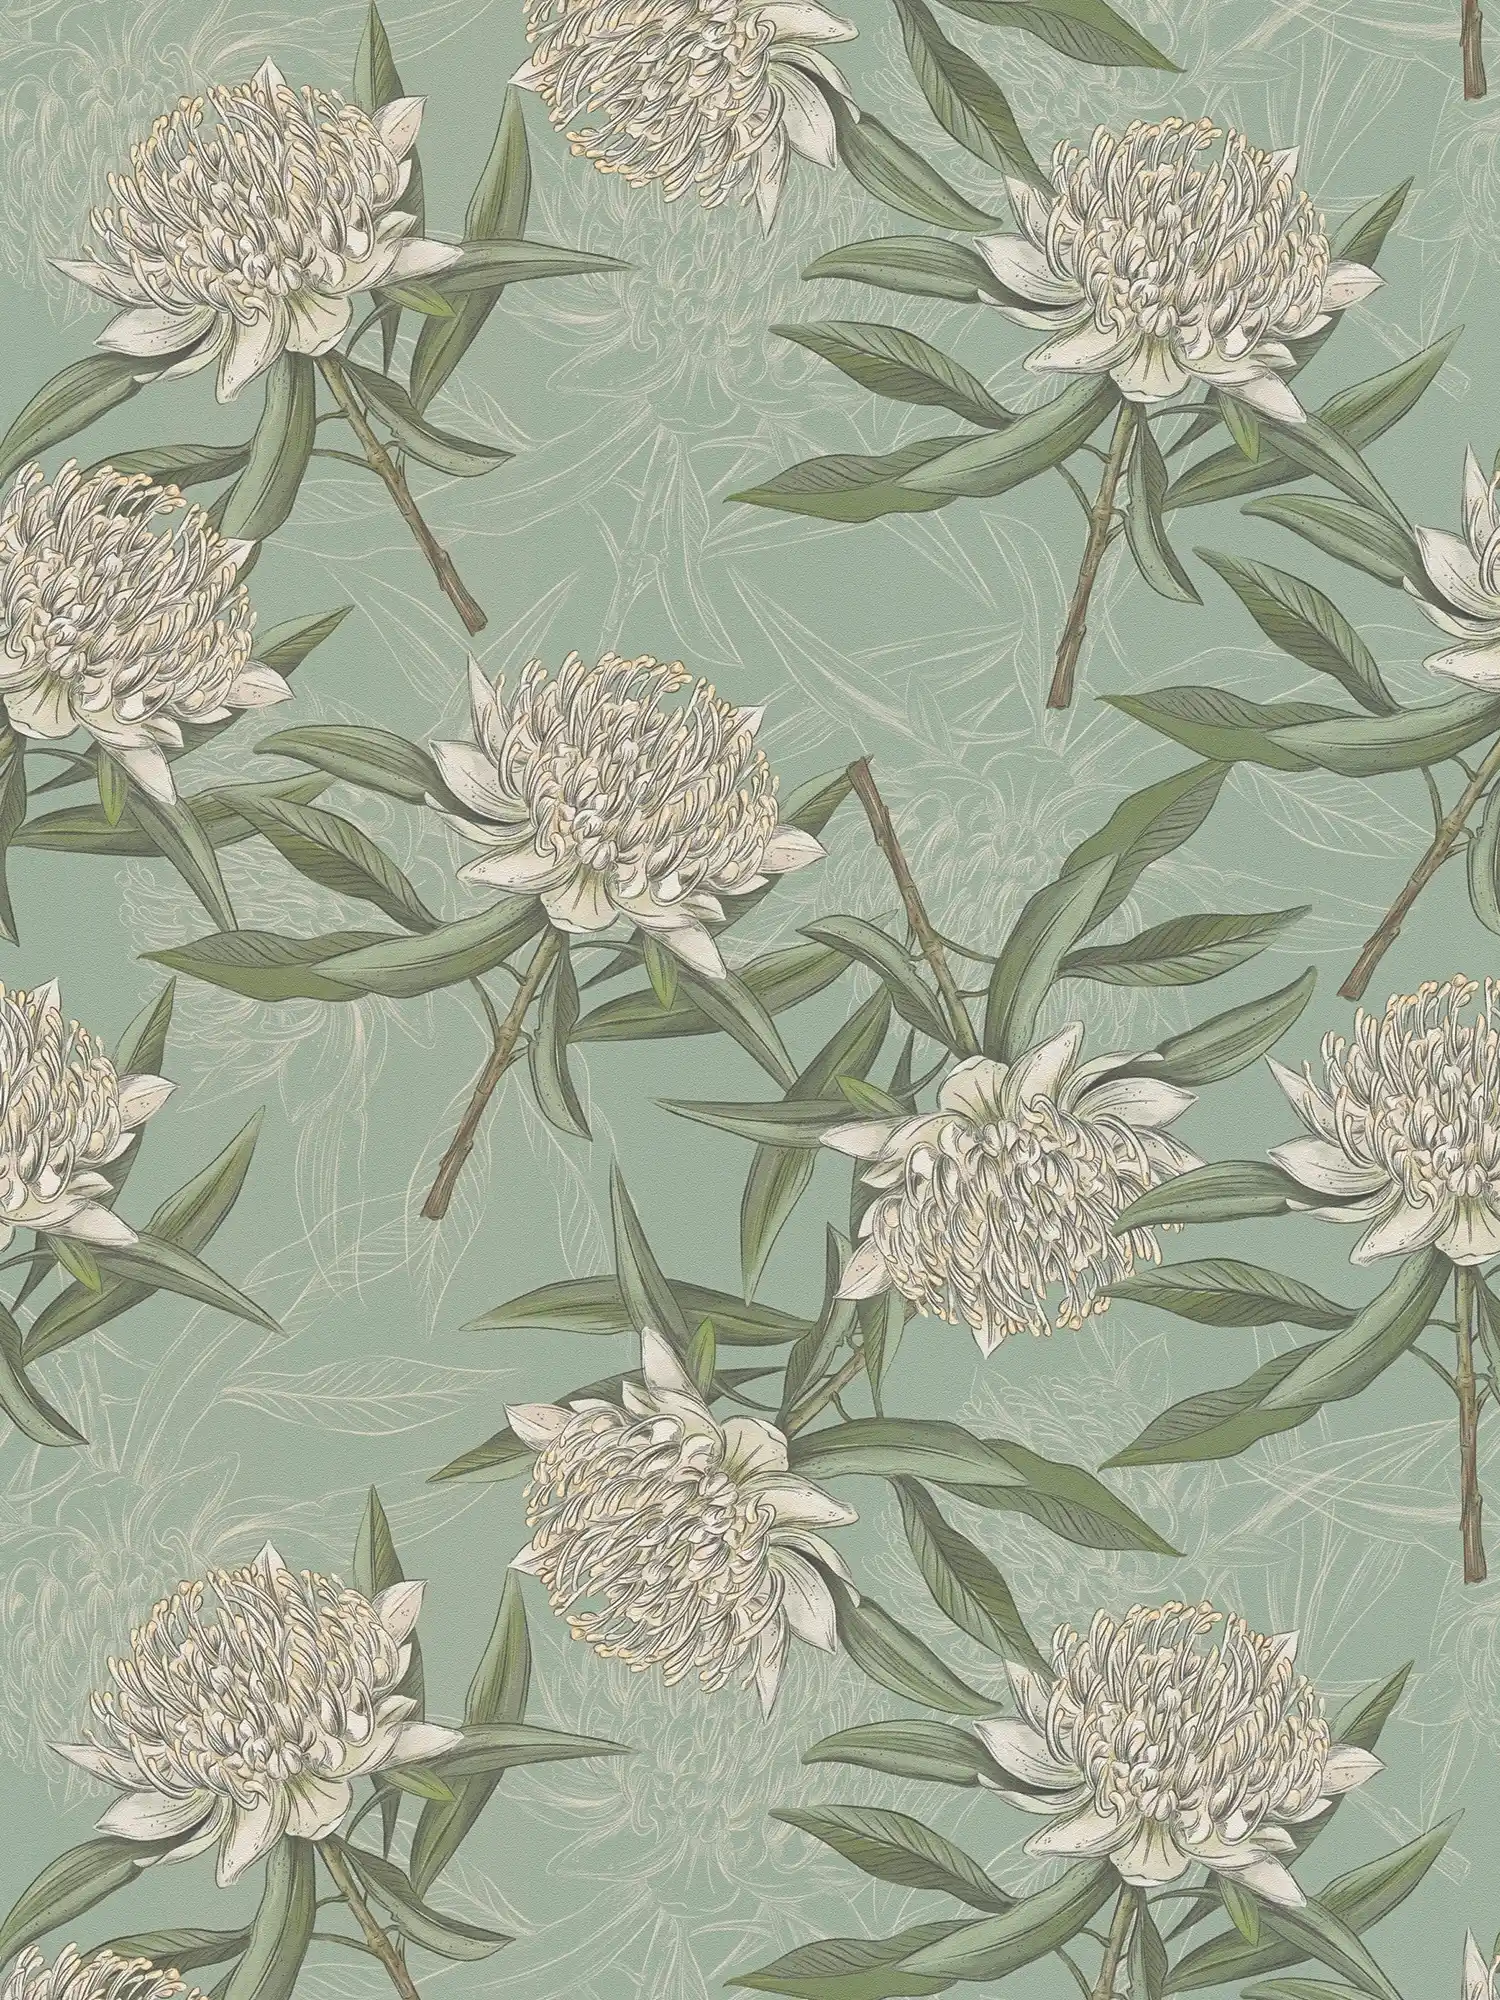 Floral wallpaper with leaves & flowers textured matt - blue, green, white
